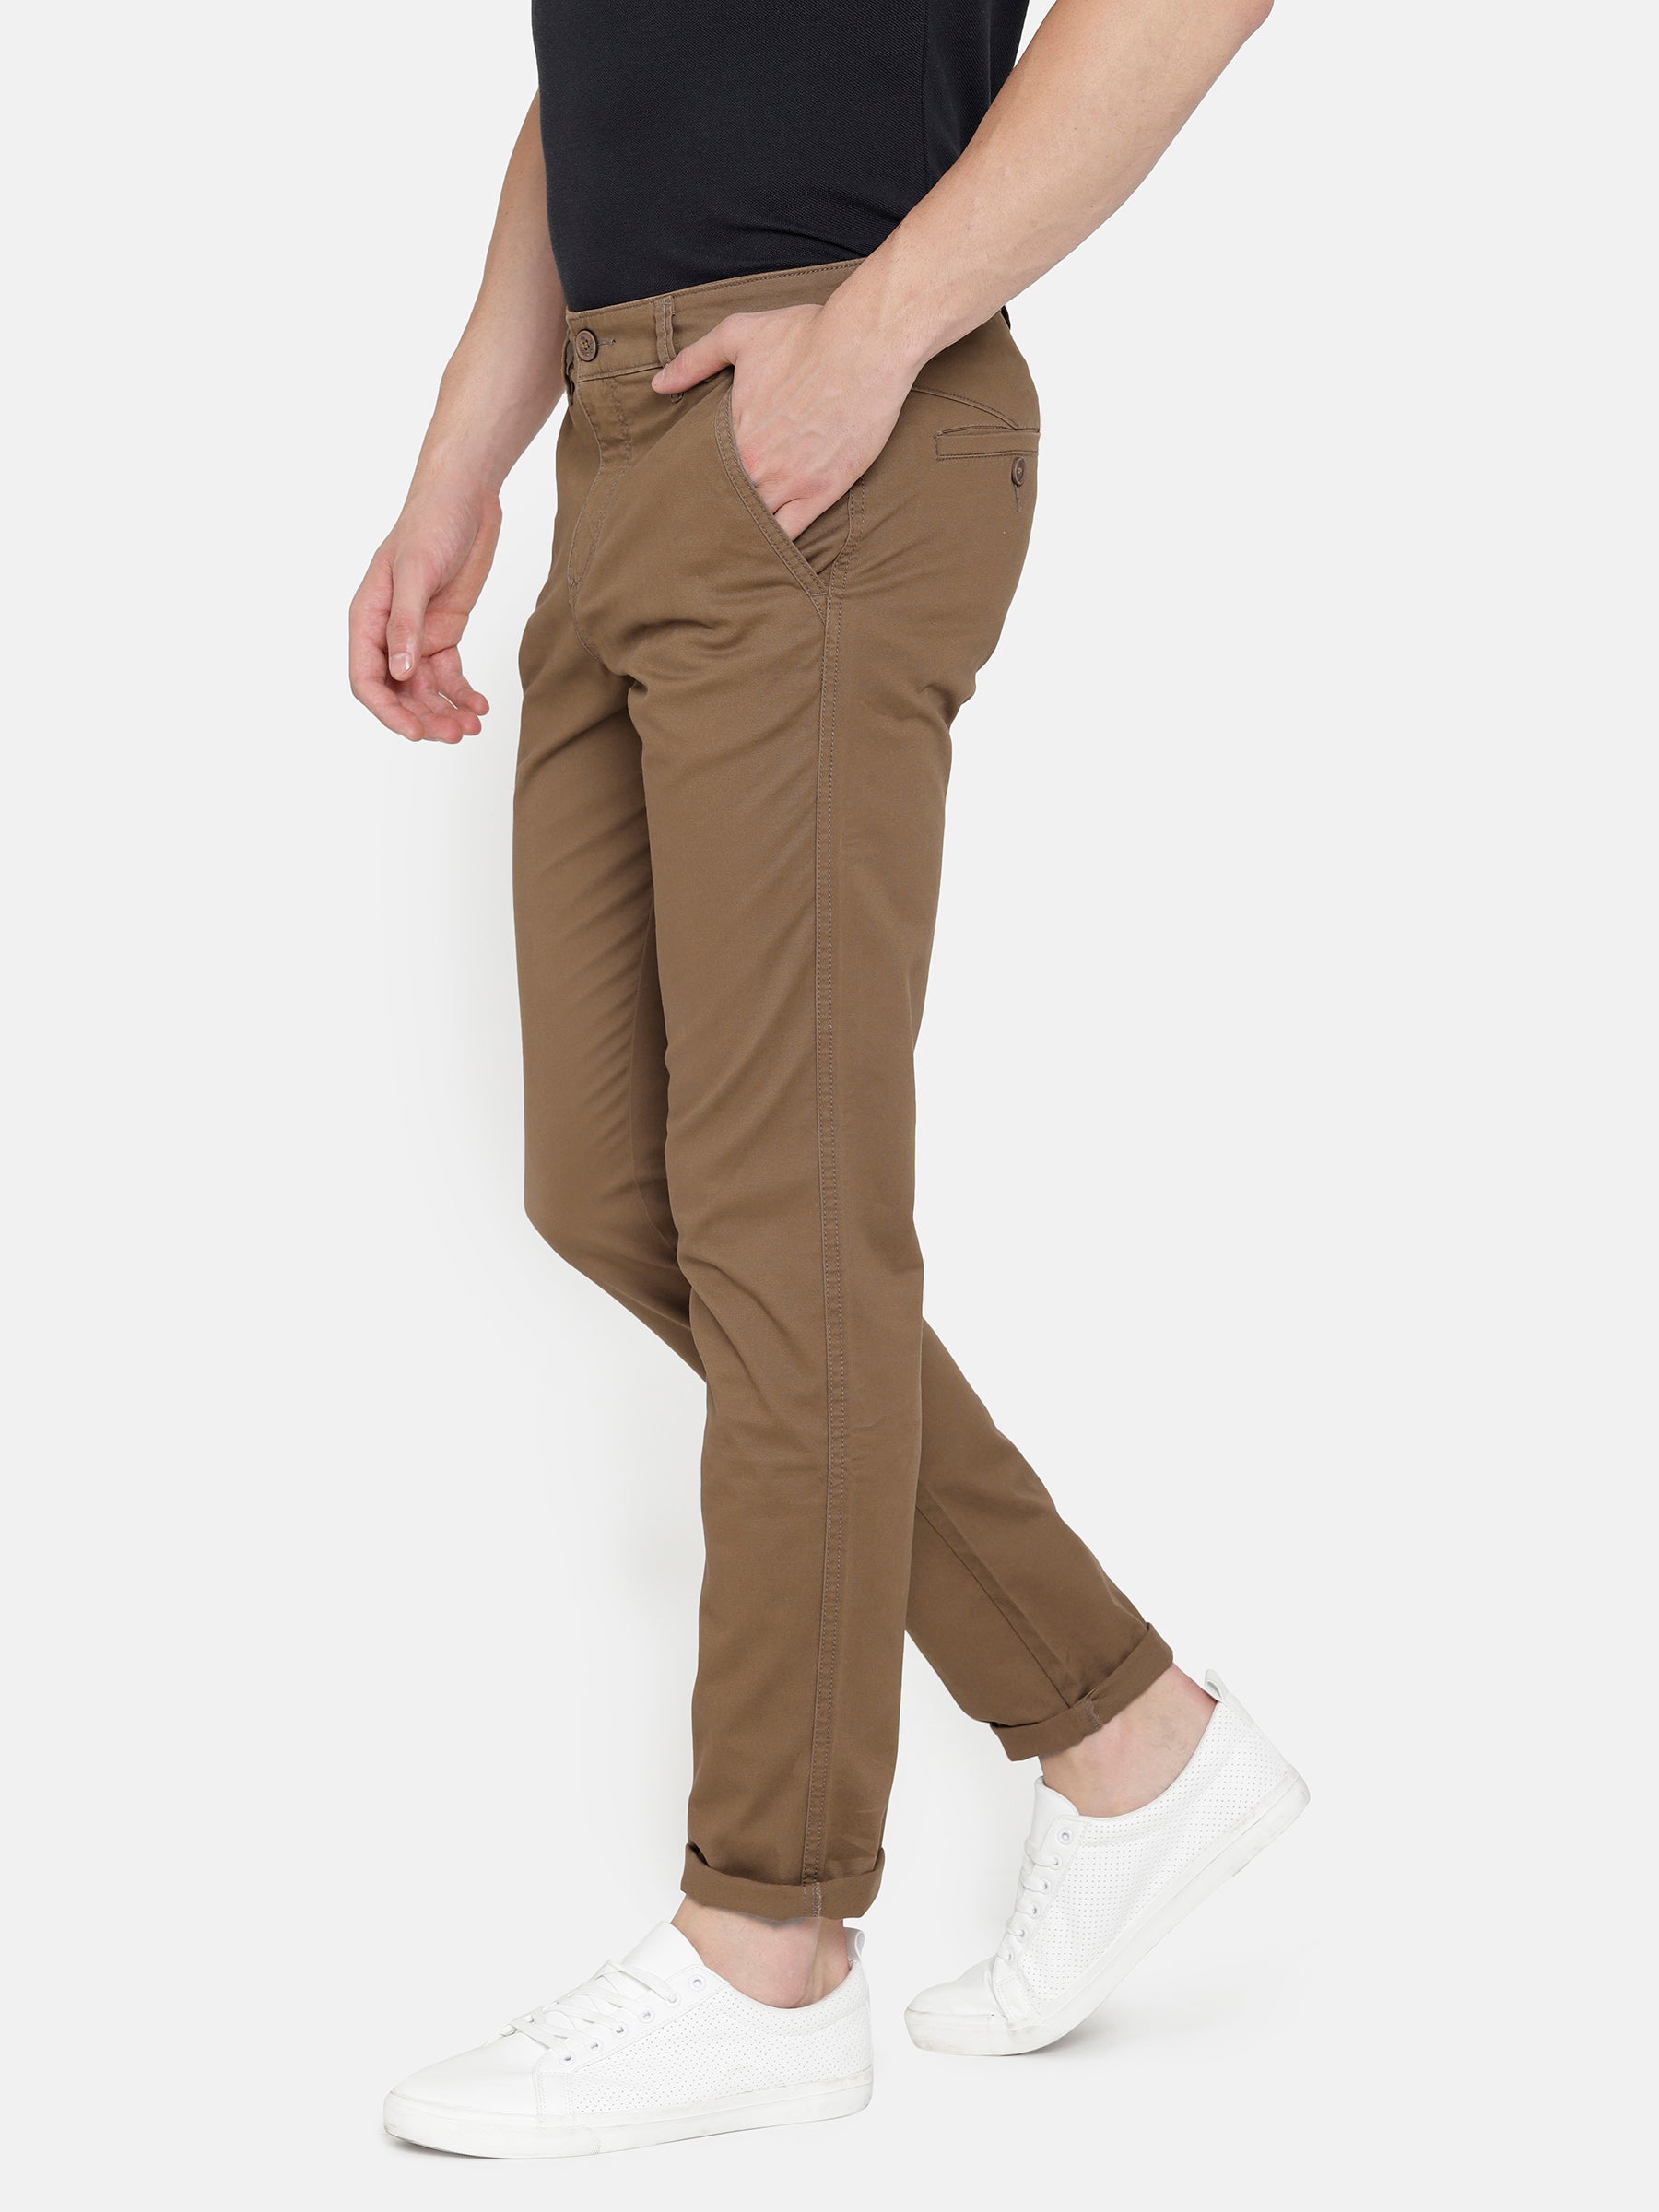 Buy BLACKBERRYS Brown Structured Cotton Blend Slim Fit Mens Trousers   Shoppers Stop